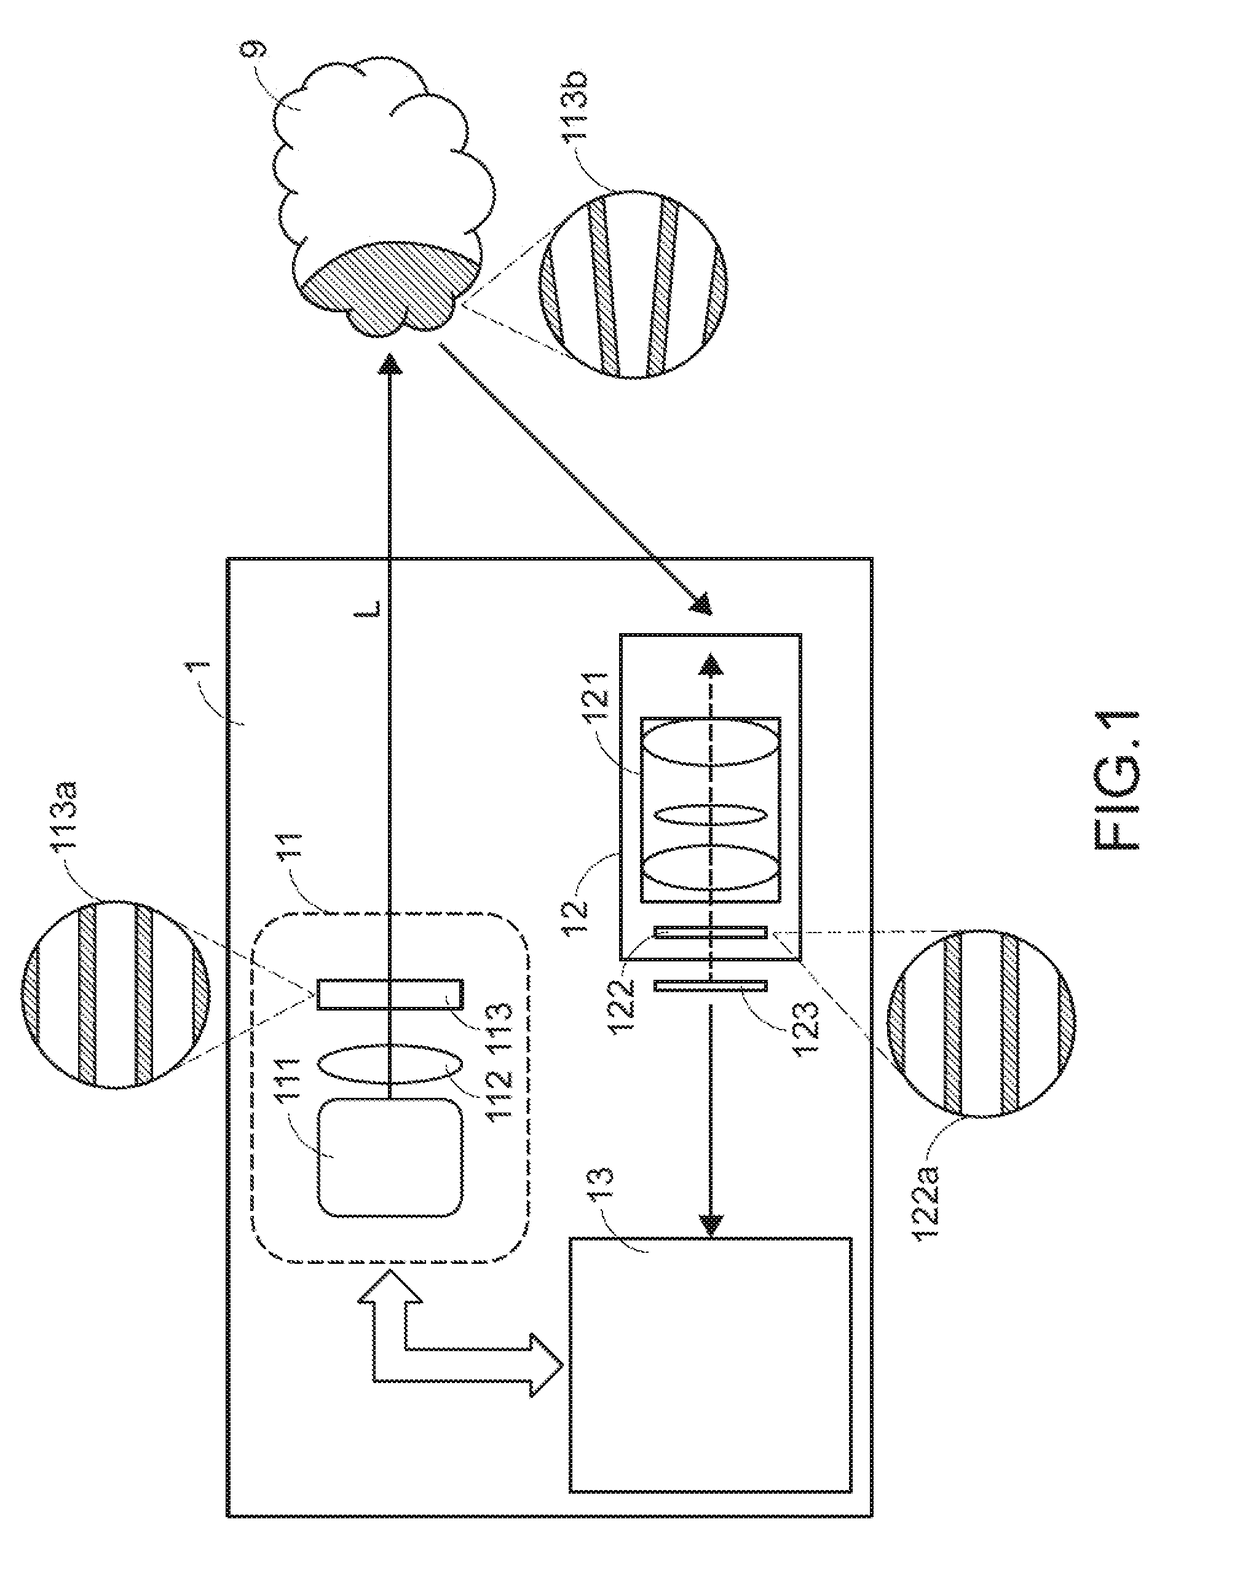 Spatial information capturing device